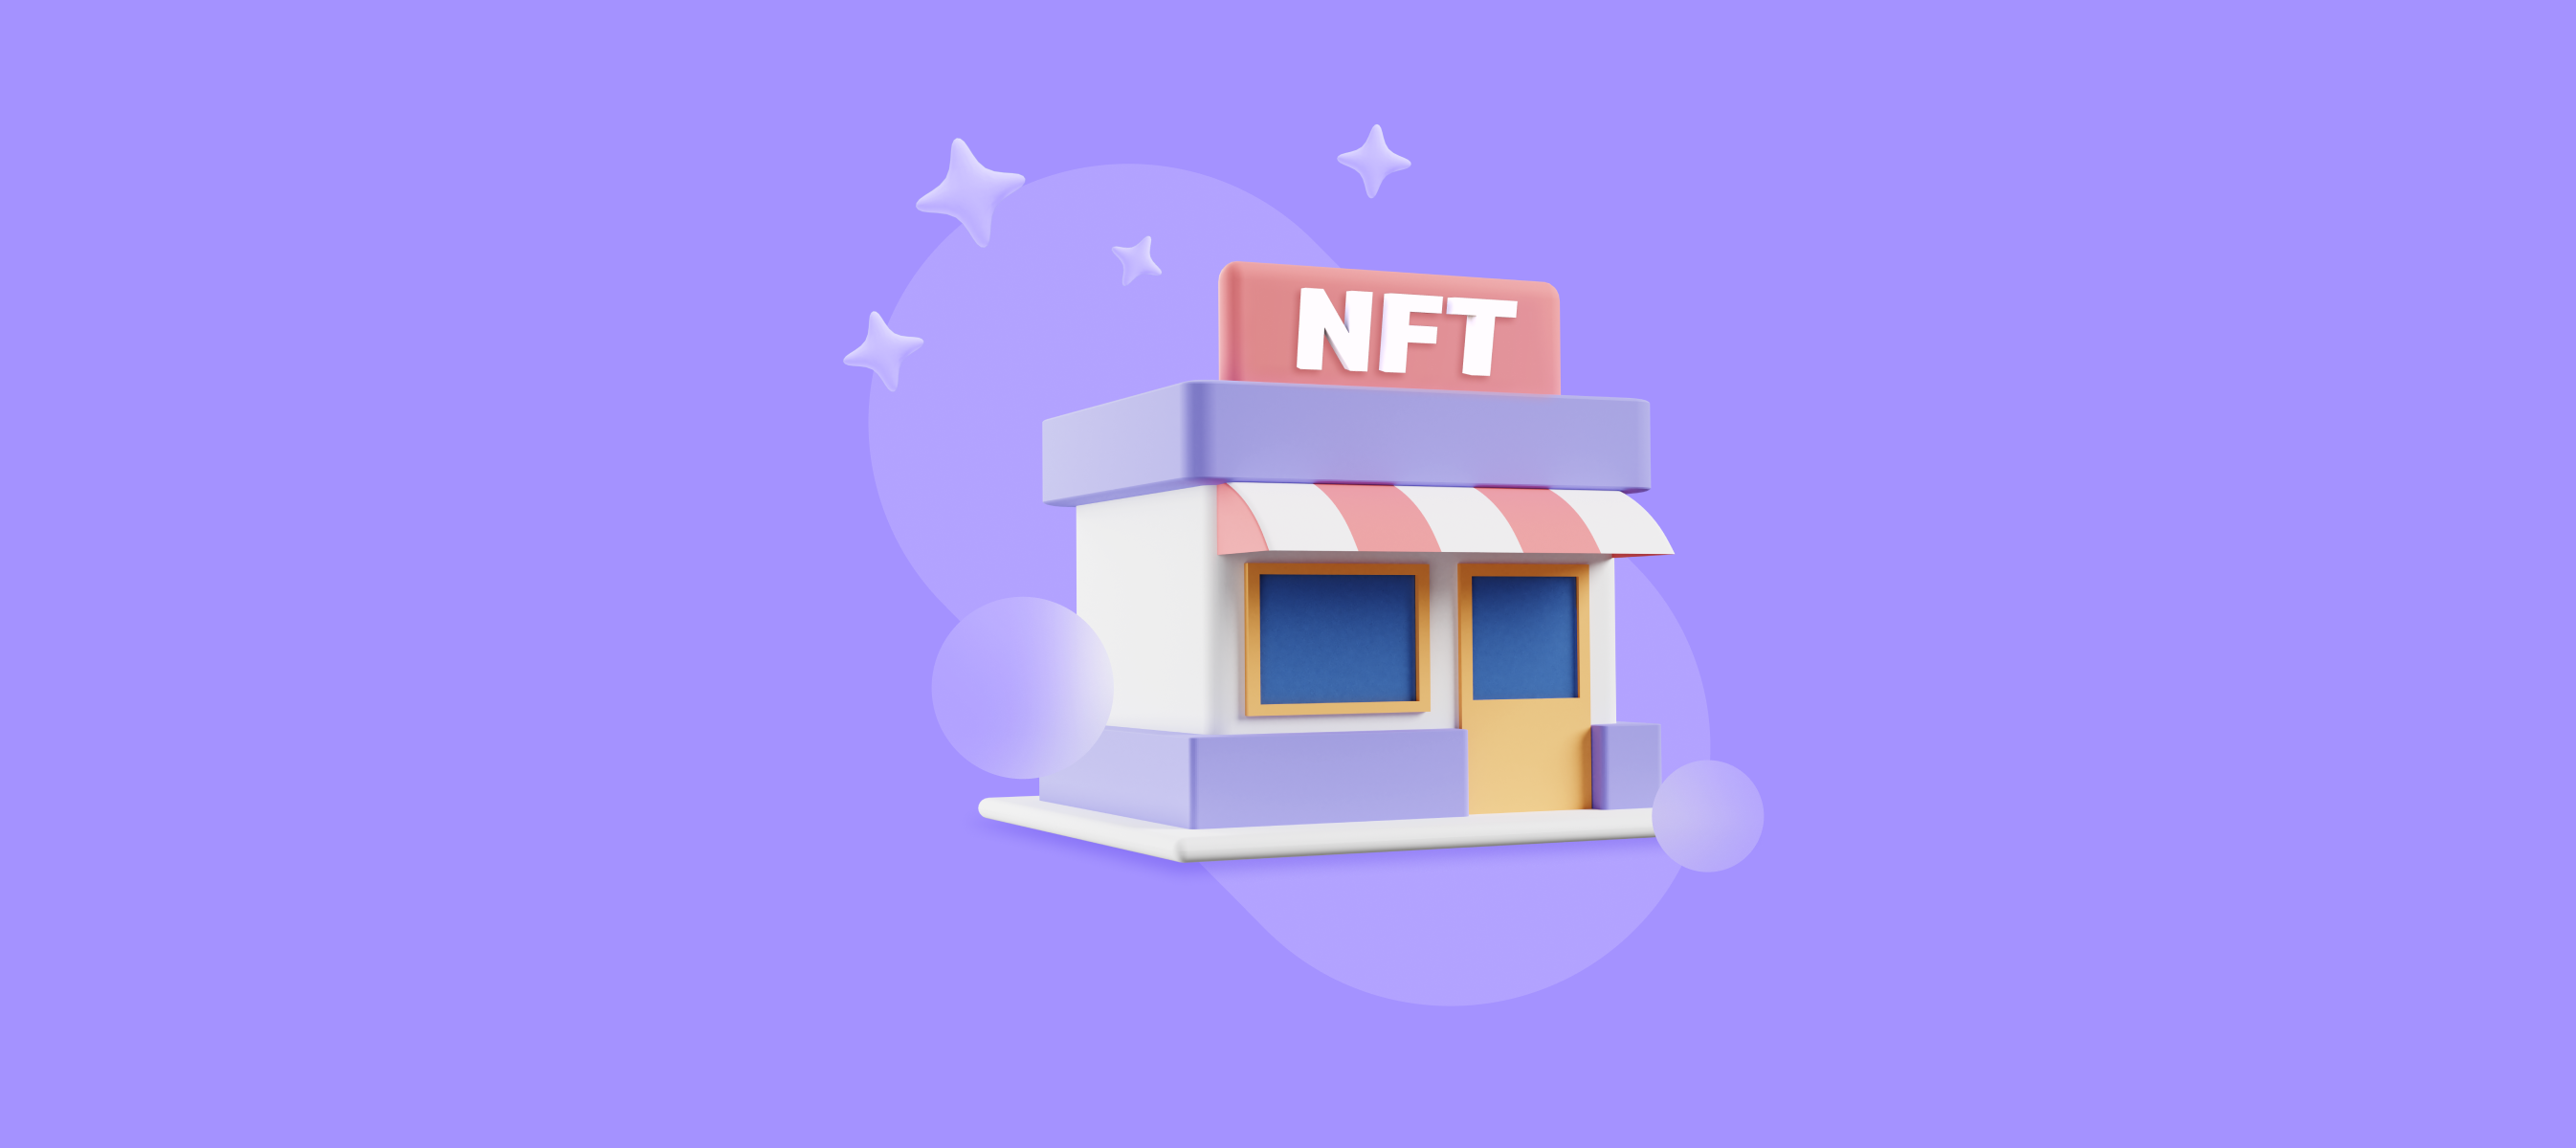 The World’s First NFT Shop Opens in Dubai